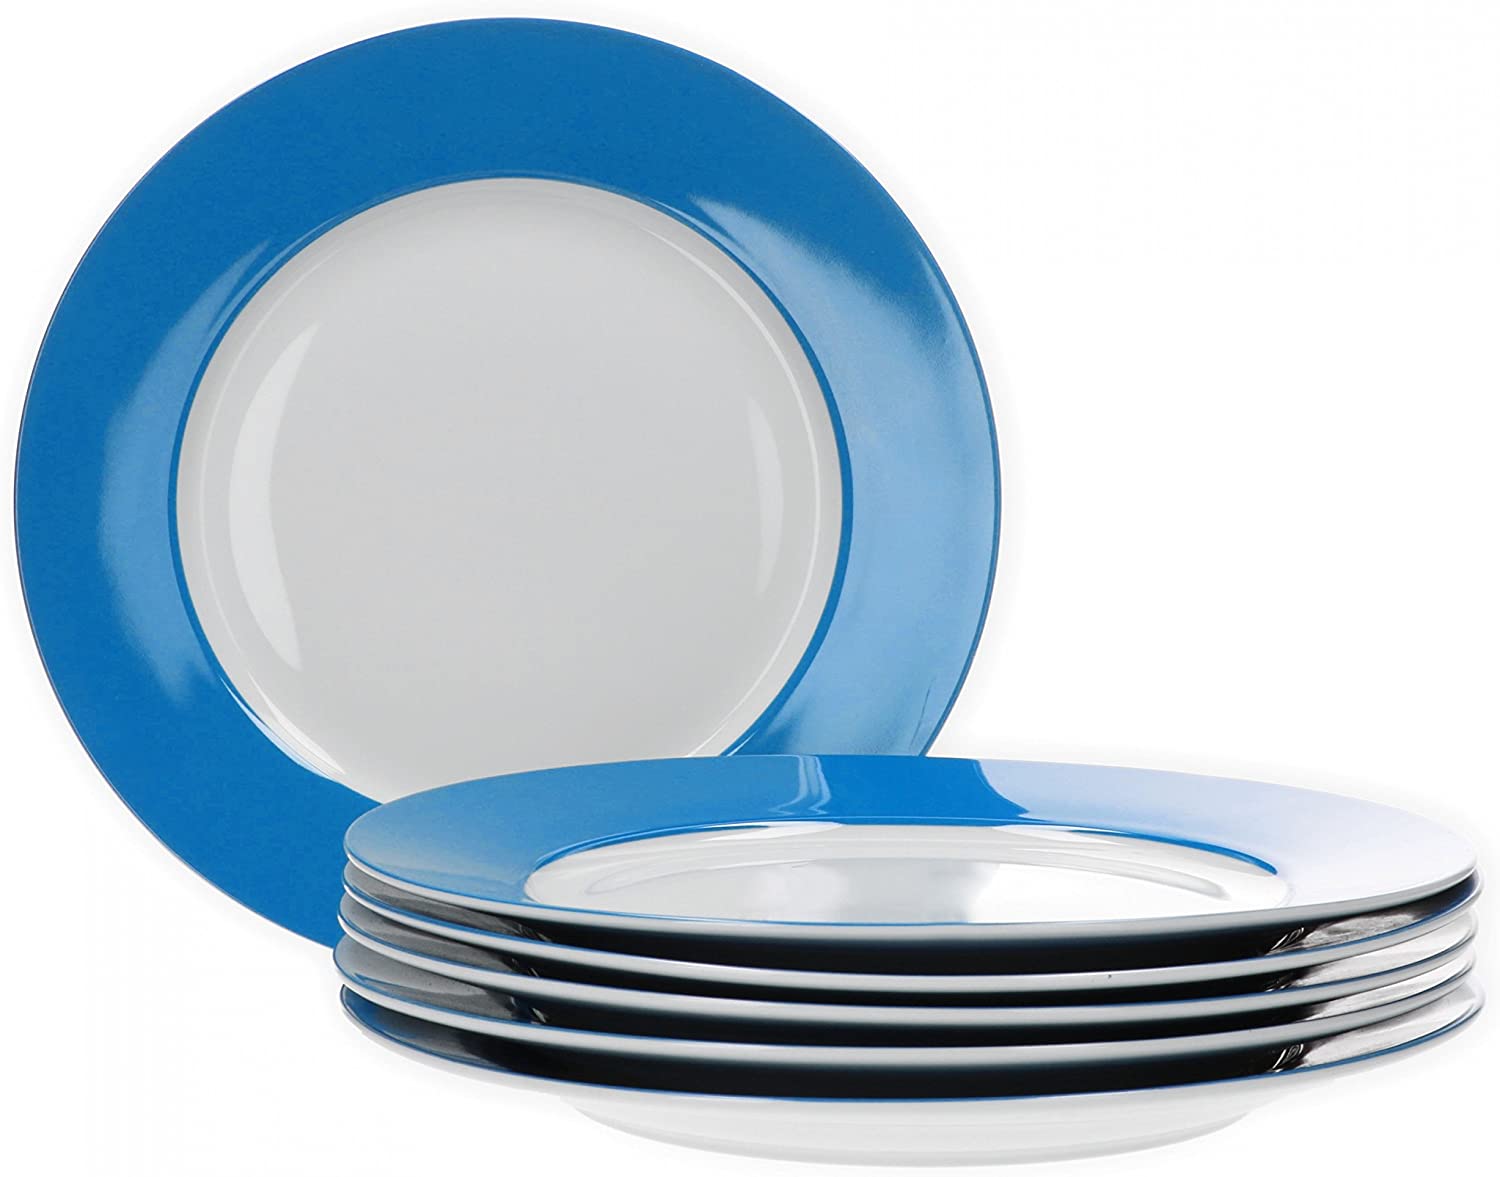 Van Well Vario Dinner Plate Set 6 Pieces I Dinner Service for 6 People I Flat Dining Plate with Diameter 26.5 cm I Porcelain Service White with Blue Rim I Plate Set Microwave Safe